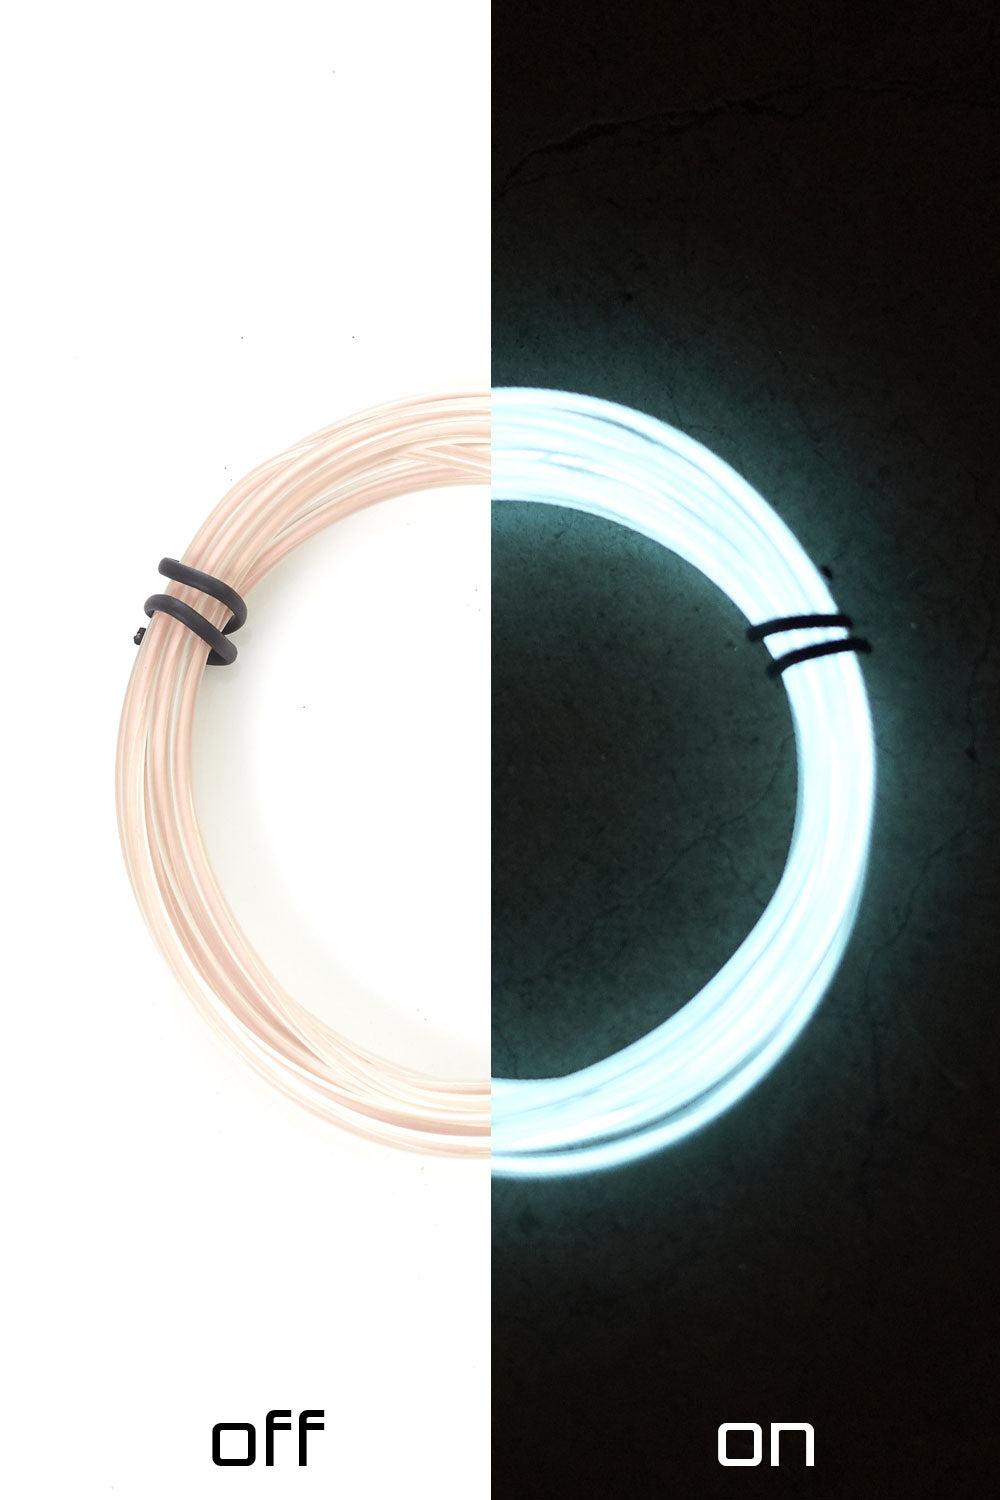 15 Foot Electroluminescent Wire Kit